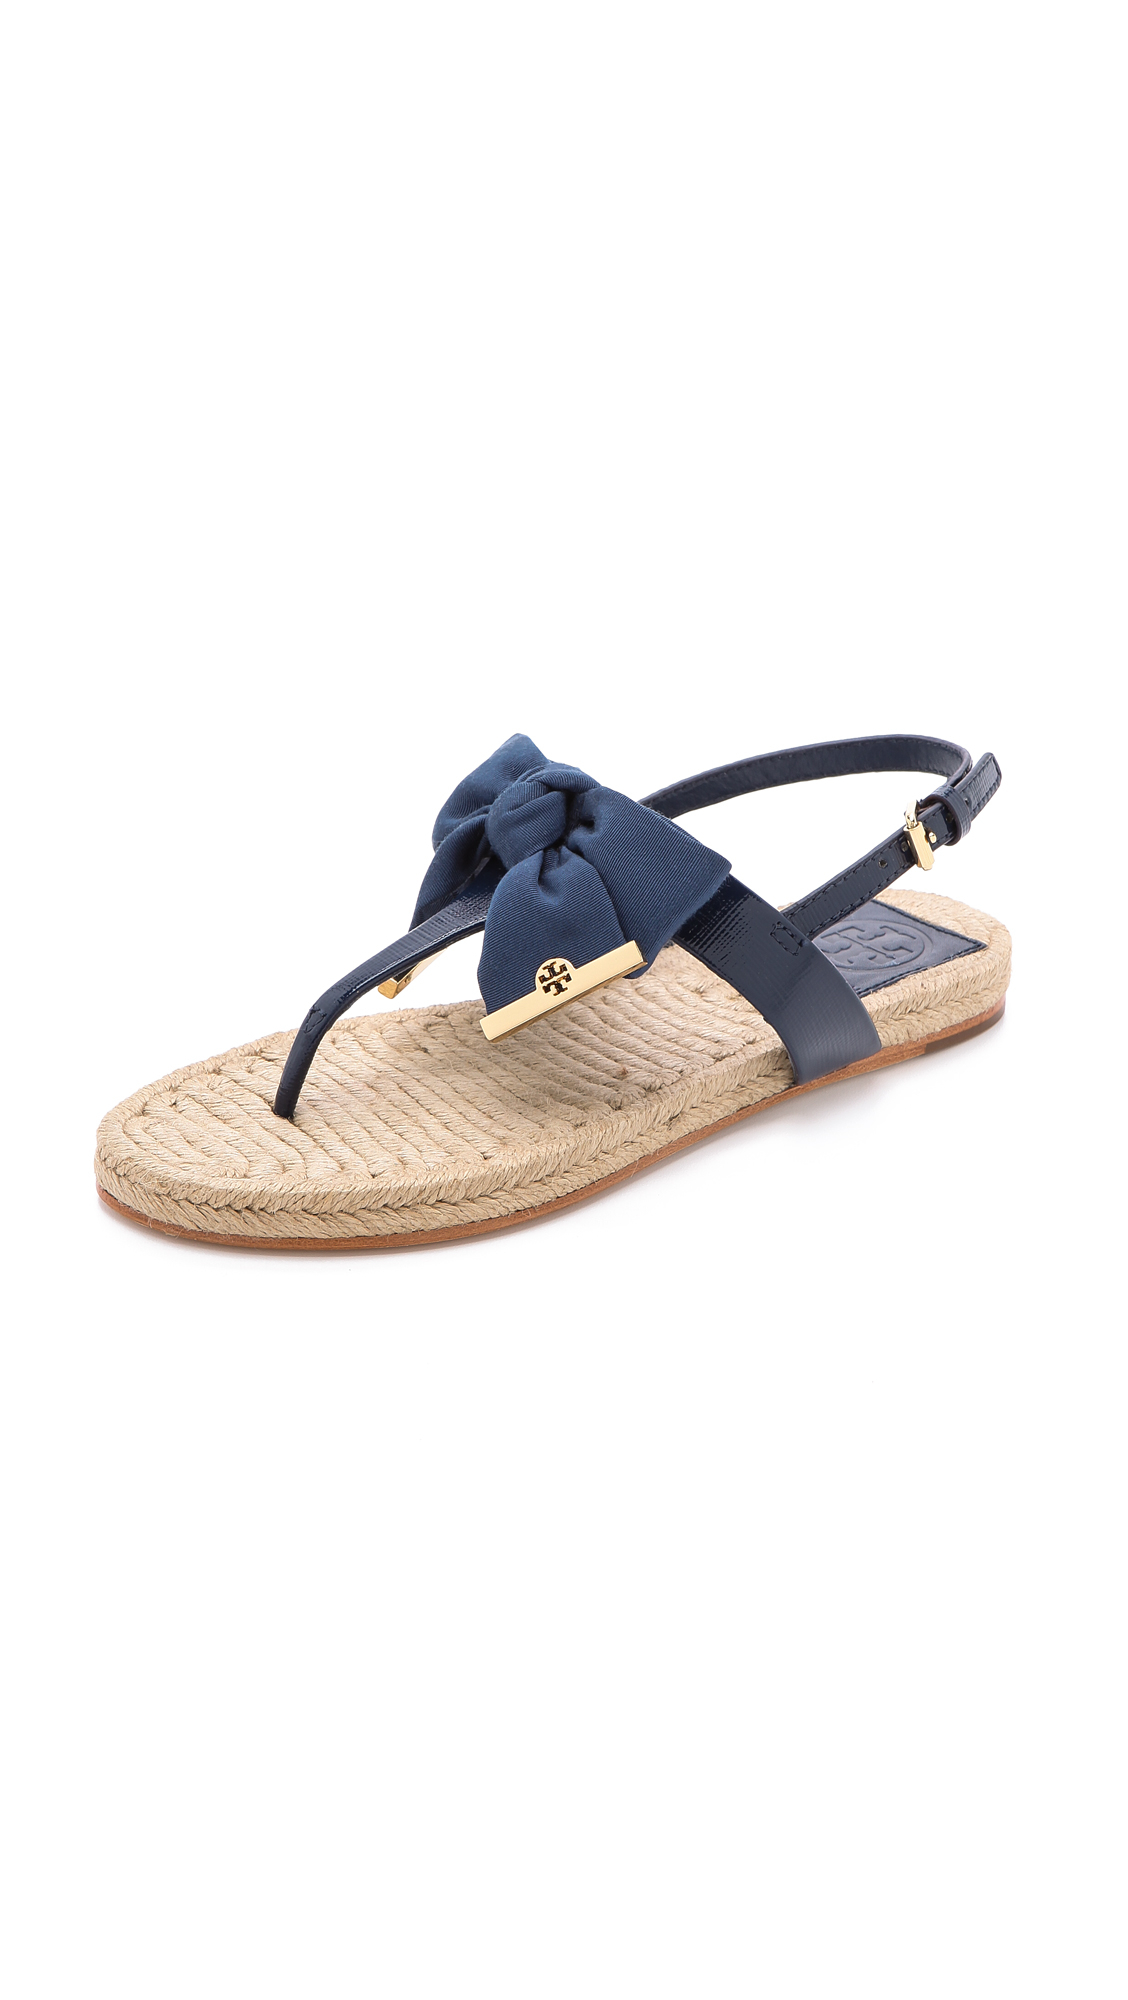 Lyst - Tory burch Penny Flat Thong Espadrilles Camellia Pink in Blue